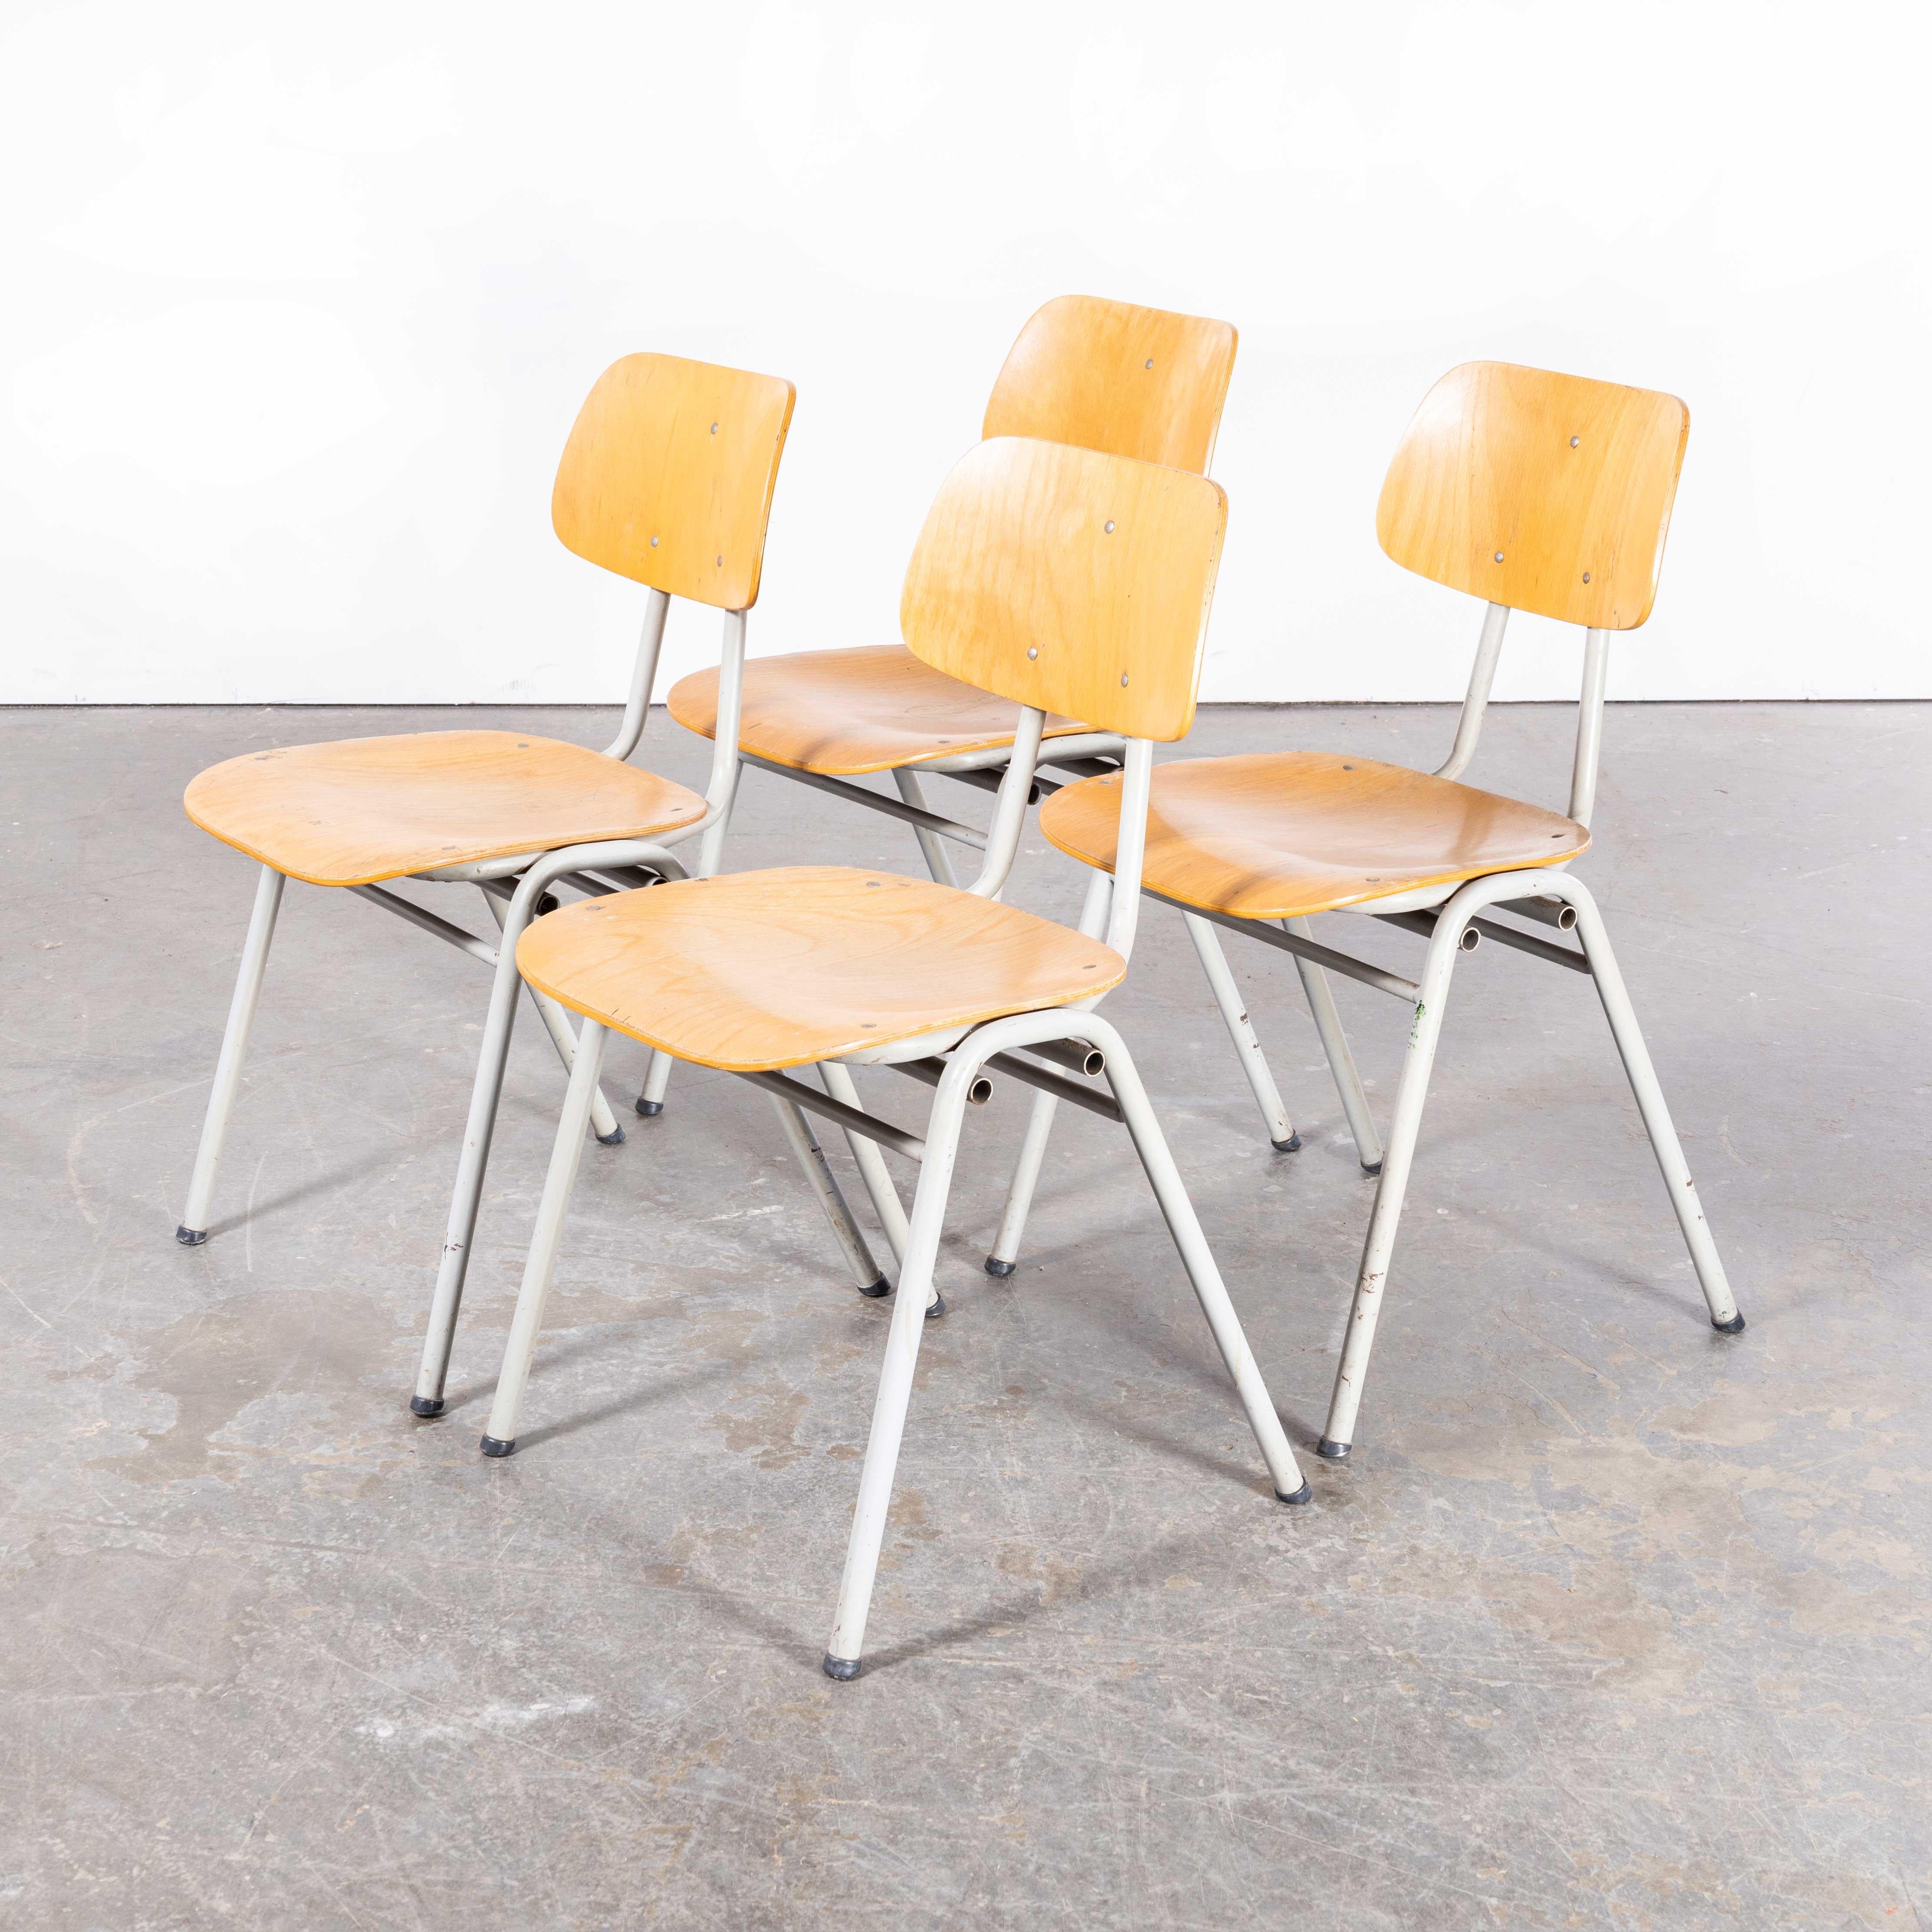 1960's Classic Dutch University Dining Chairs - Set Of Four

1960's Classic Dutch University Dining Chairs - Set Of Four. These chairs came from a university in the Netherlands. These chairs are very sturdy with metal frames and gently shaped beech